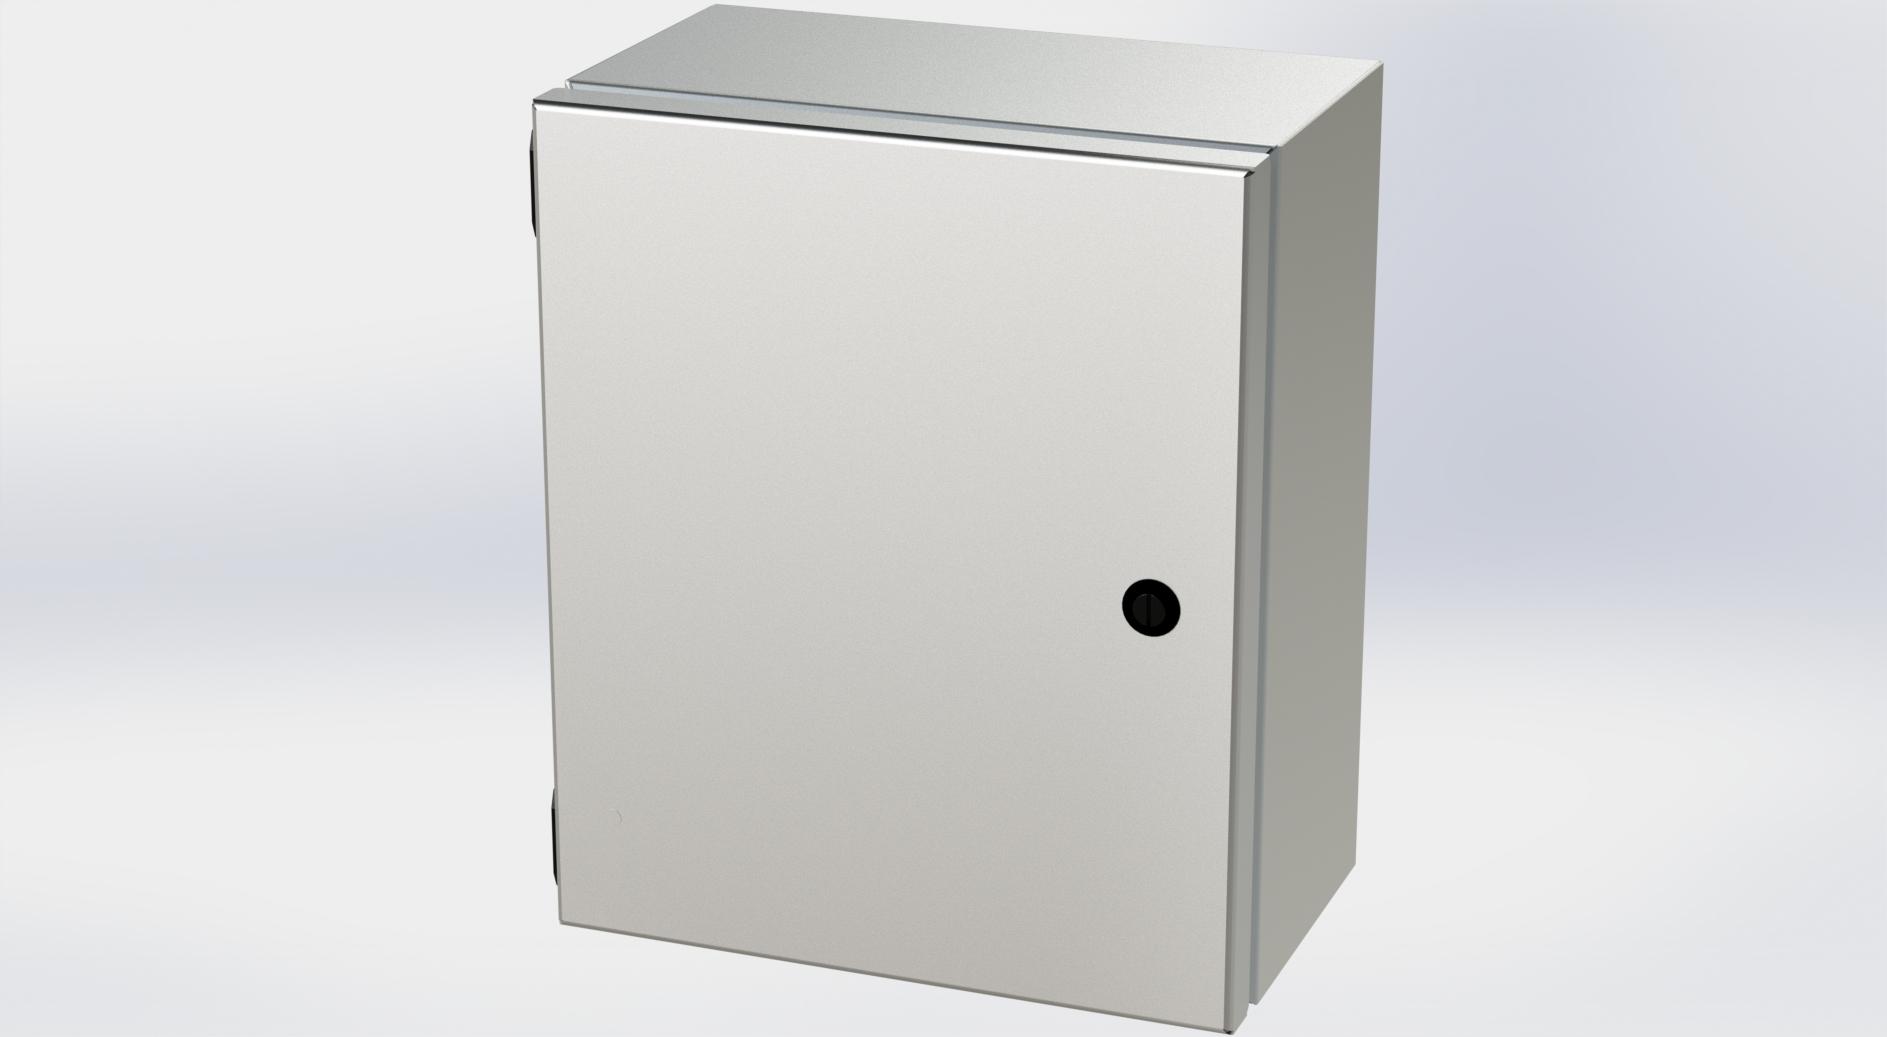 Saginaw Control SCE-1210ELJSS6 S.S. ELJ Enclosure, Height:12.00", Width:10.00", Depth:6.00", #4 brushed finish on all exterior surfaces. Optional sub-panels are powder coated white.